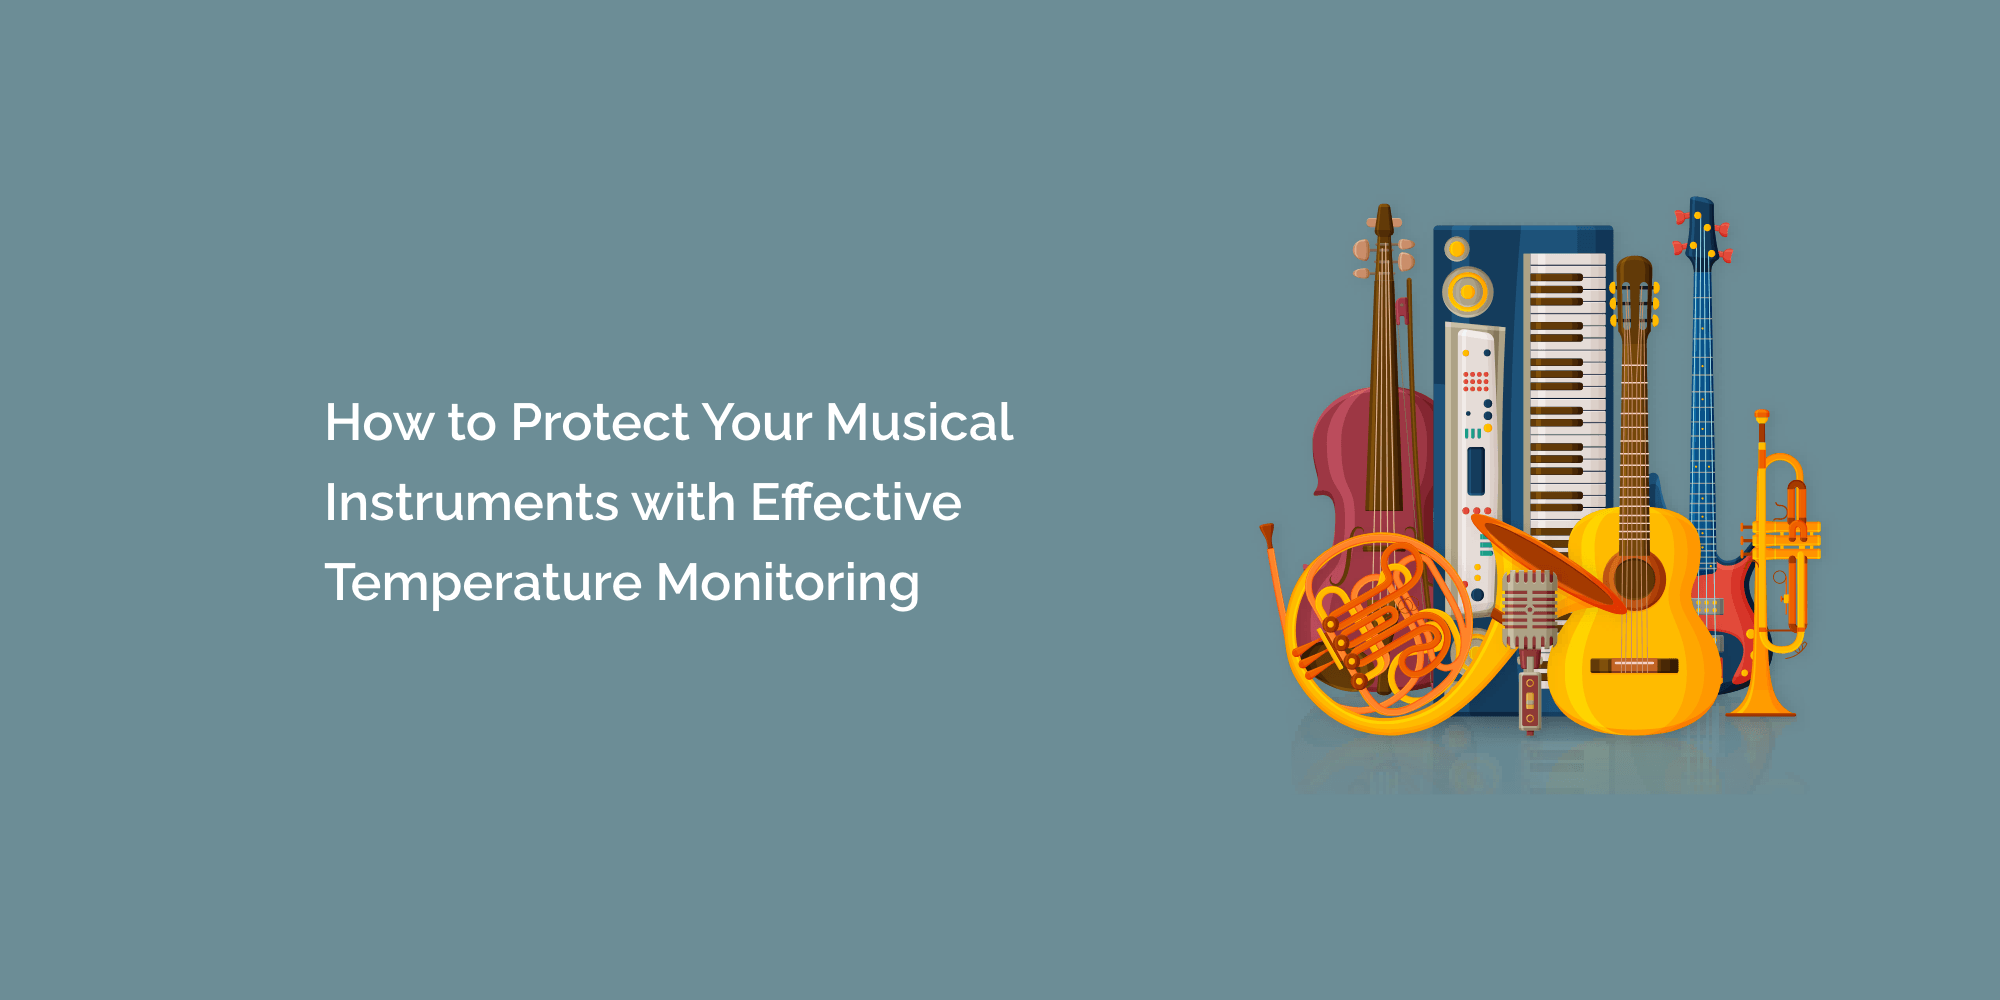 How to Protect Your Musical Instruments with Effective Temperature Monitoring